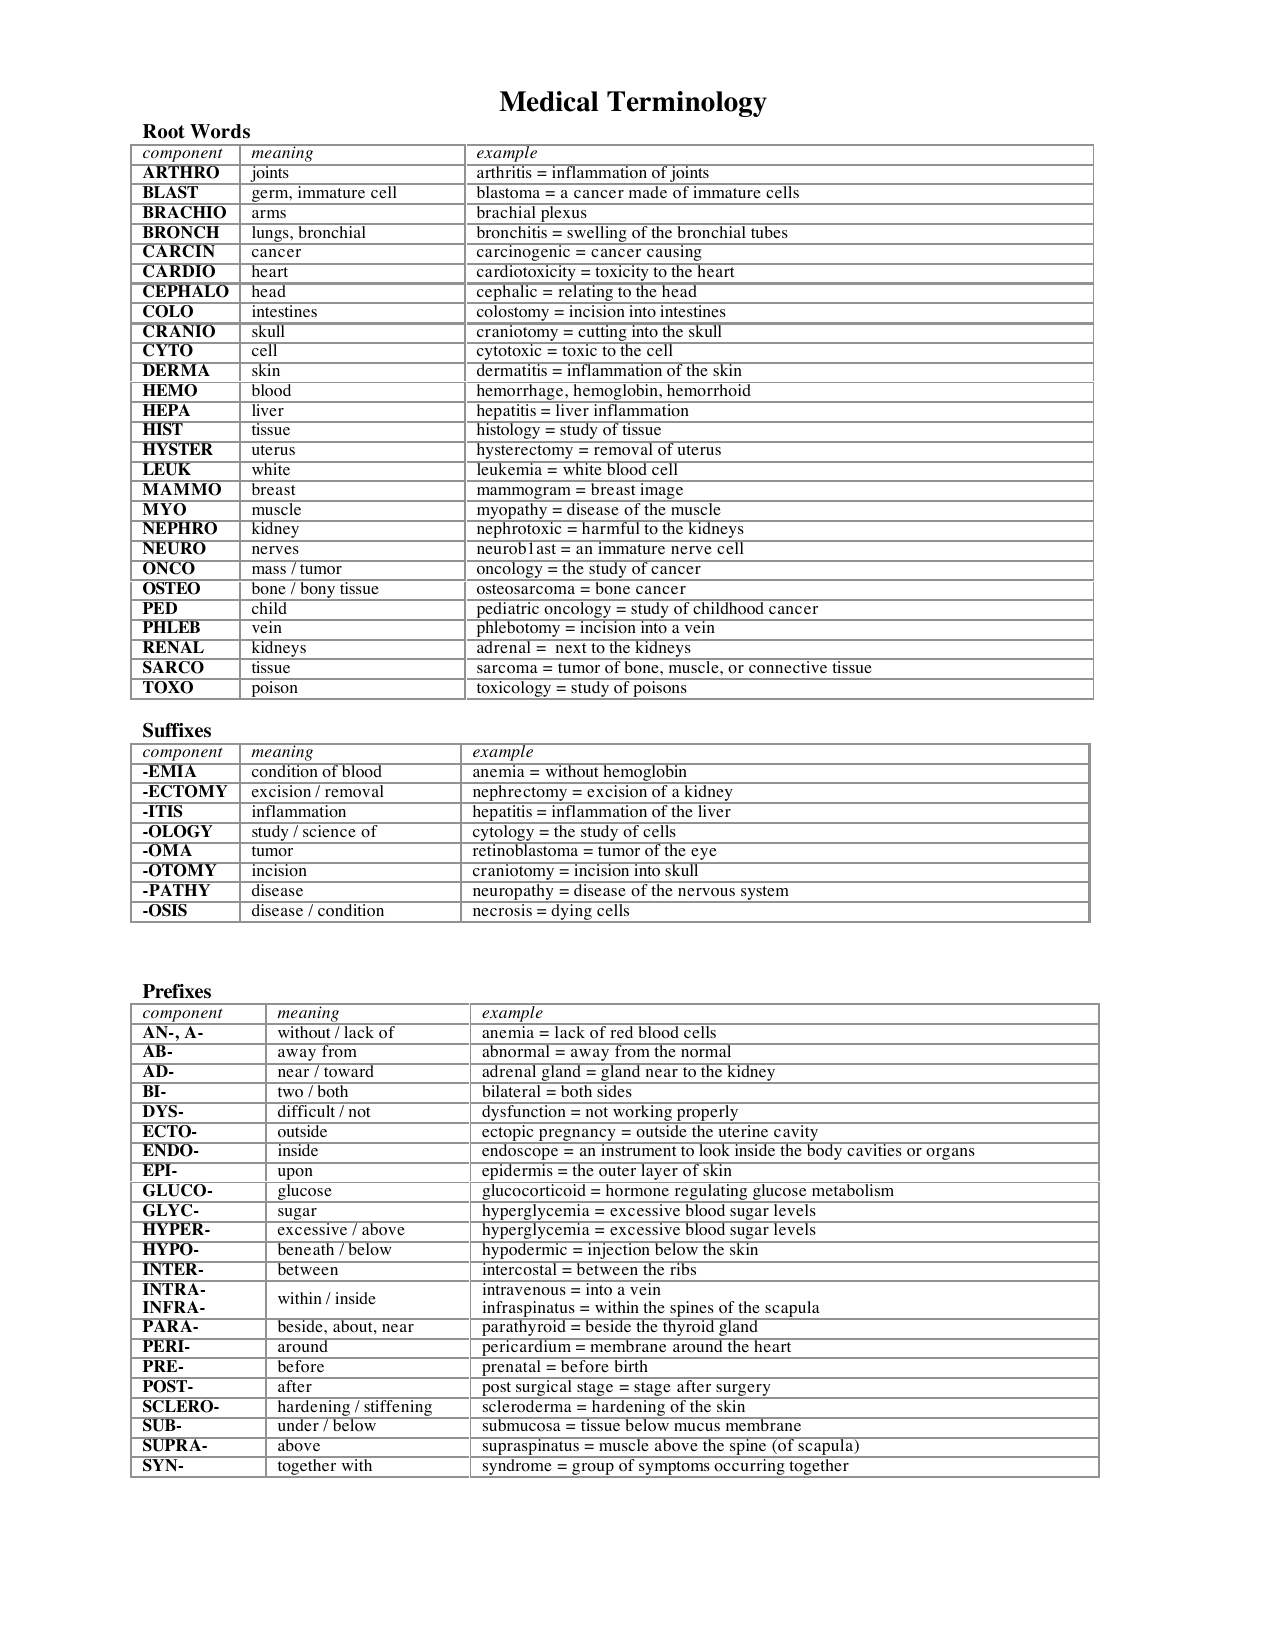 Medical Terminology With Medical Terminology Abbreviations Worksheet